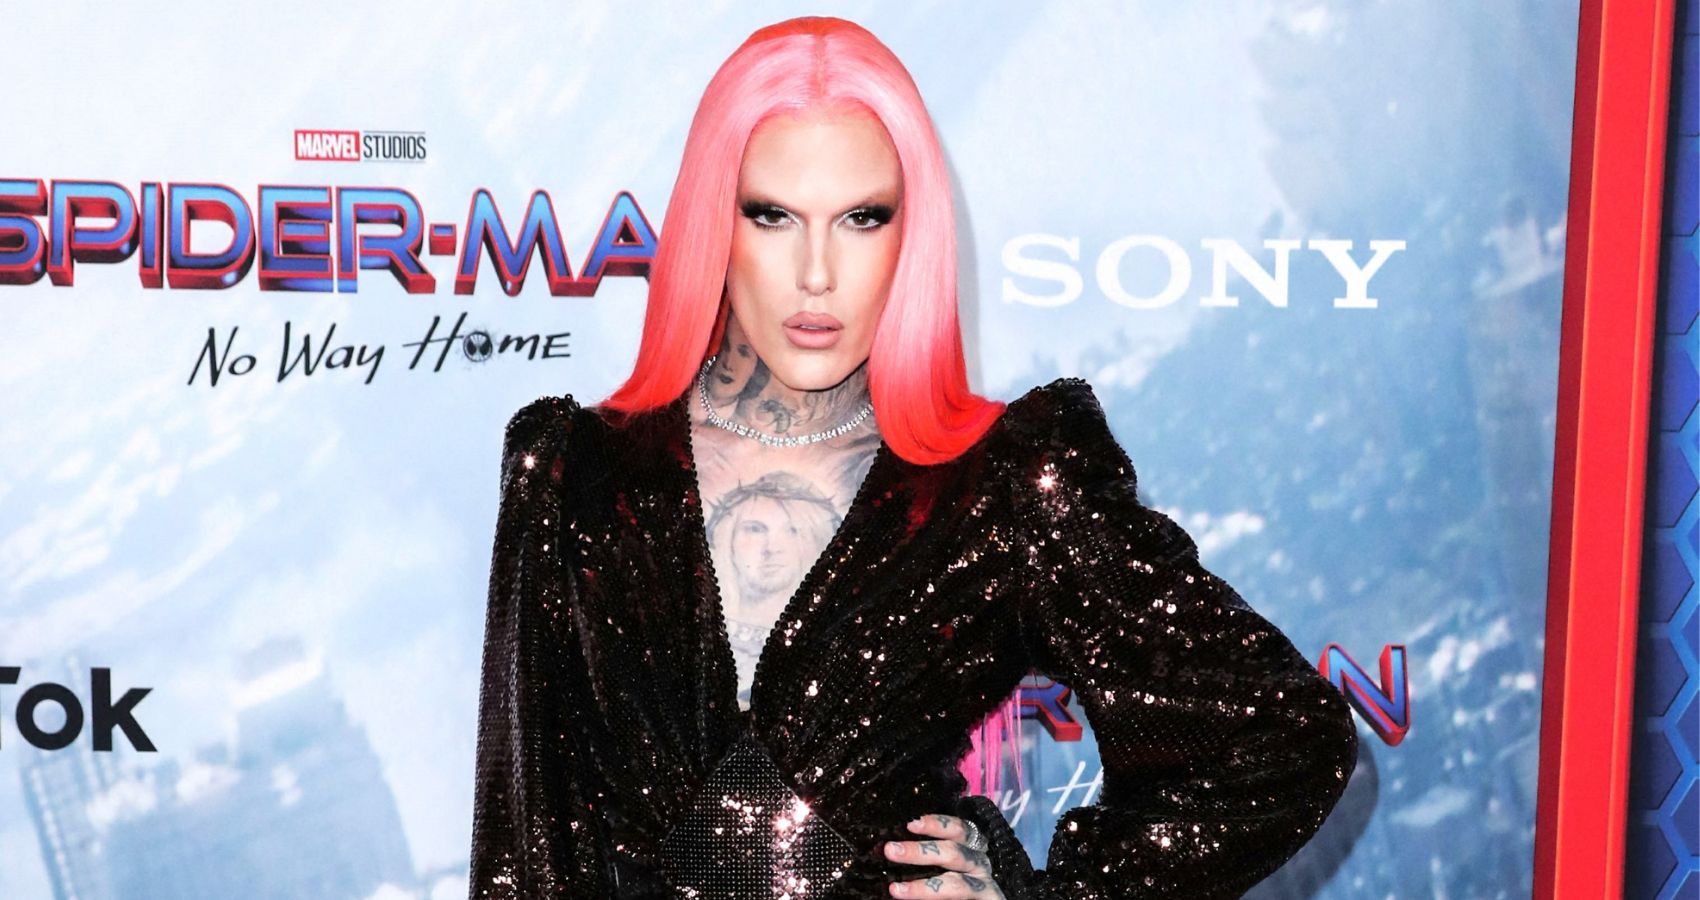 Jeffree Star attends the LA premeire of Spider Man No Way Home 2021